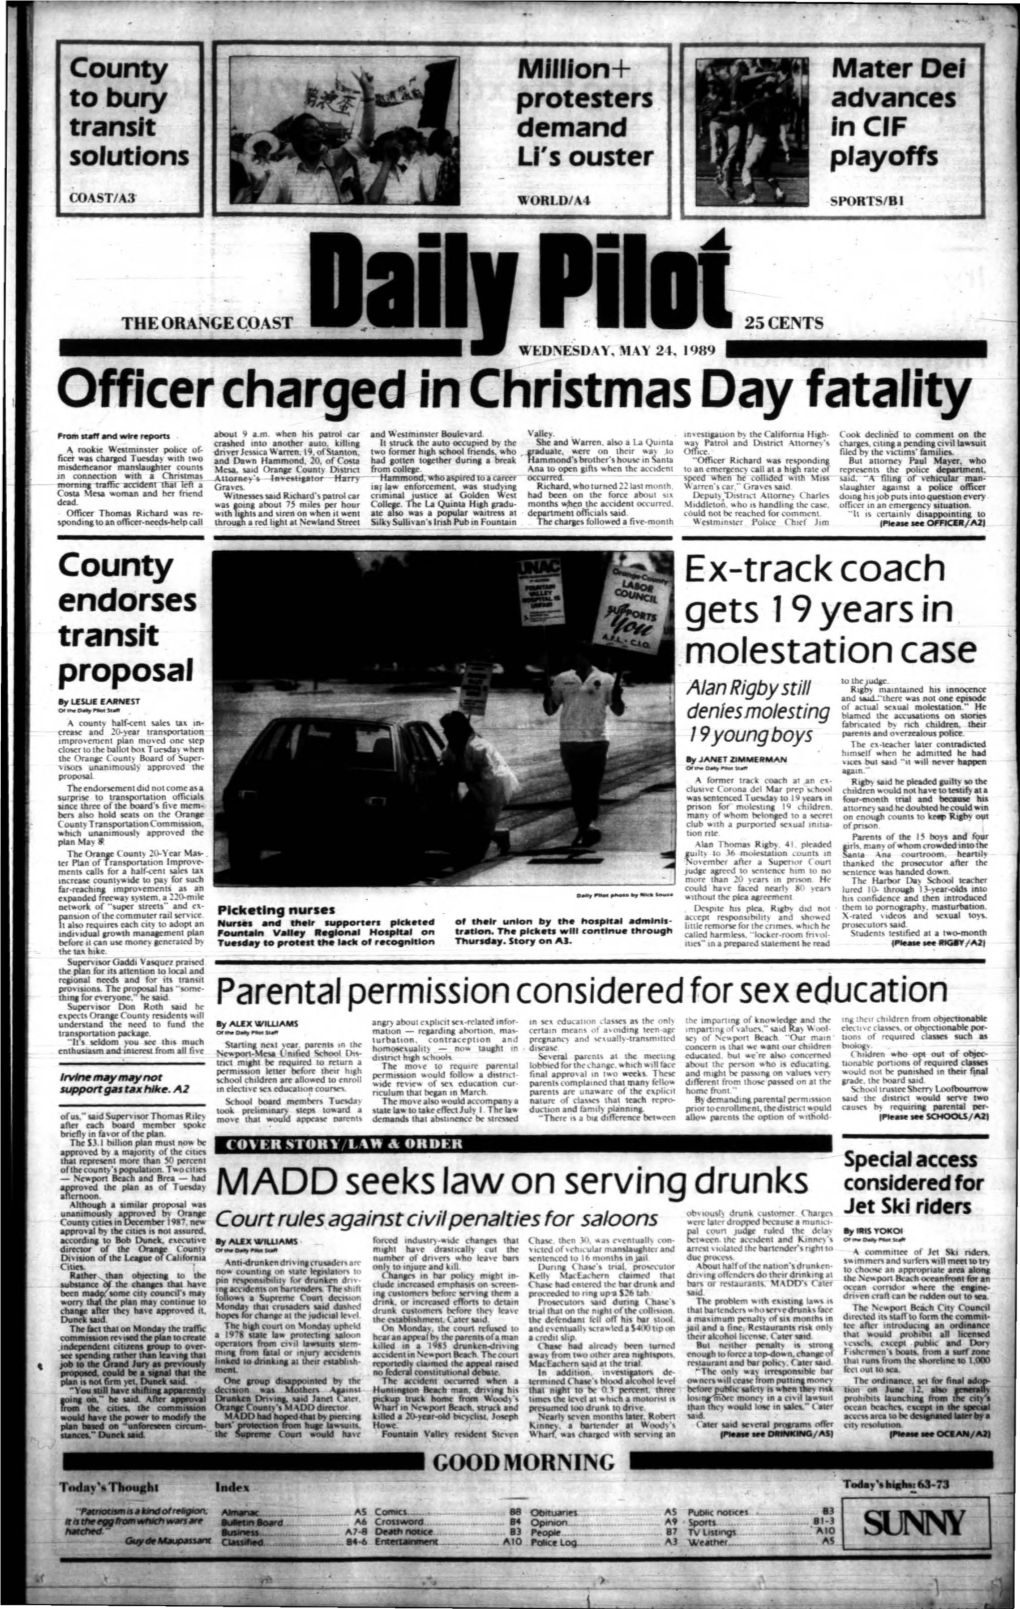 Officer Charged in Christmas Day ·Fatality